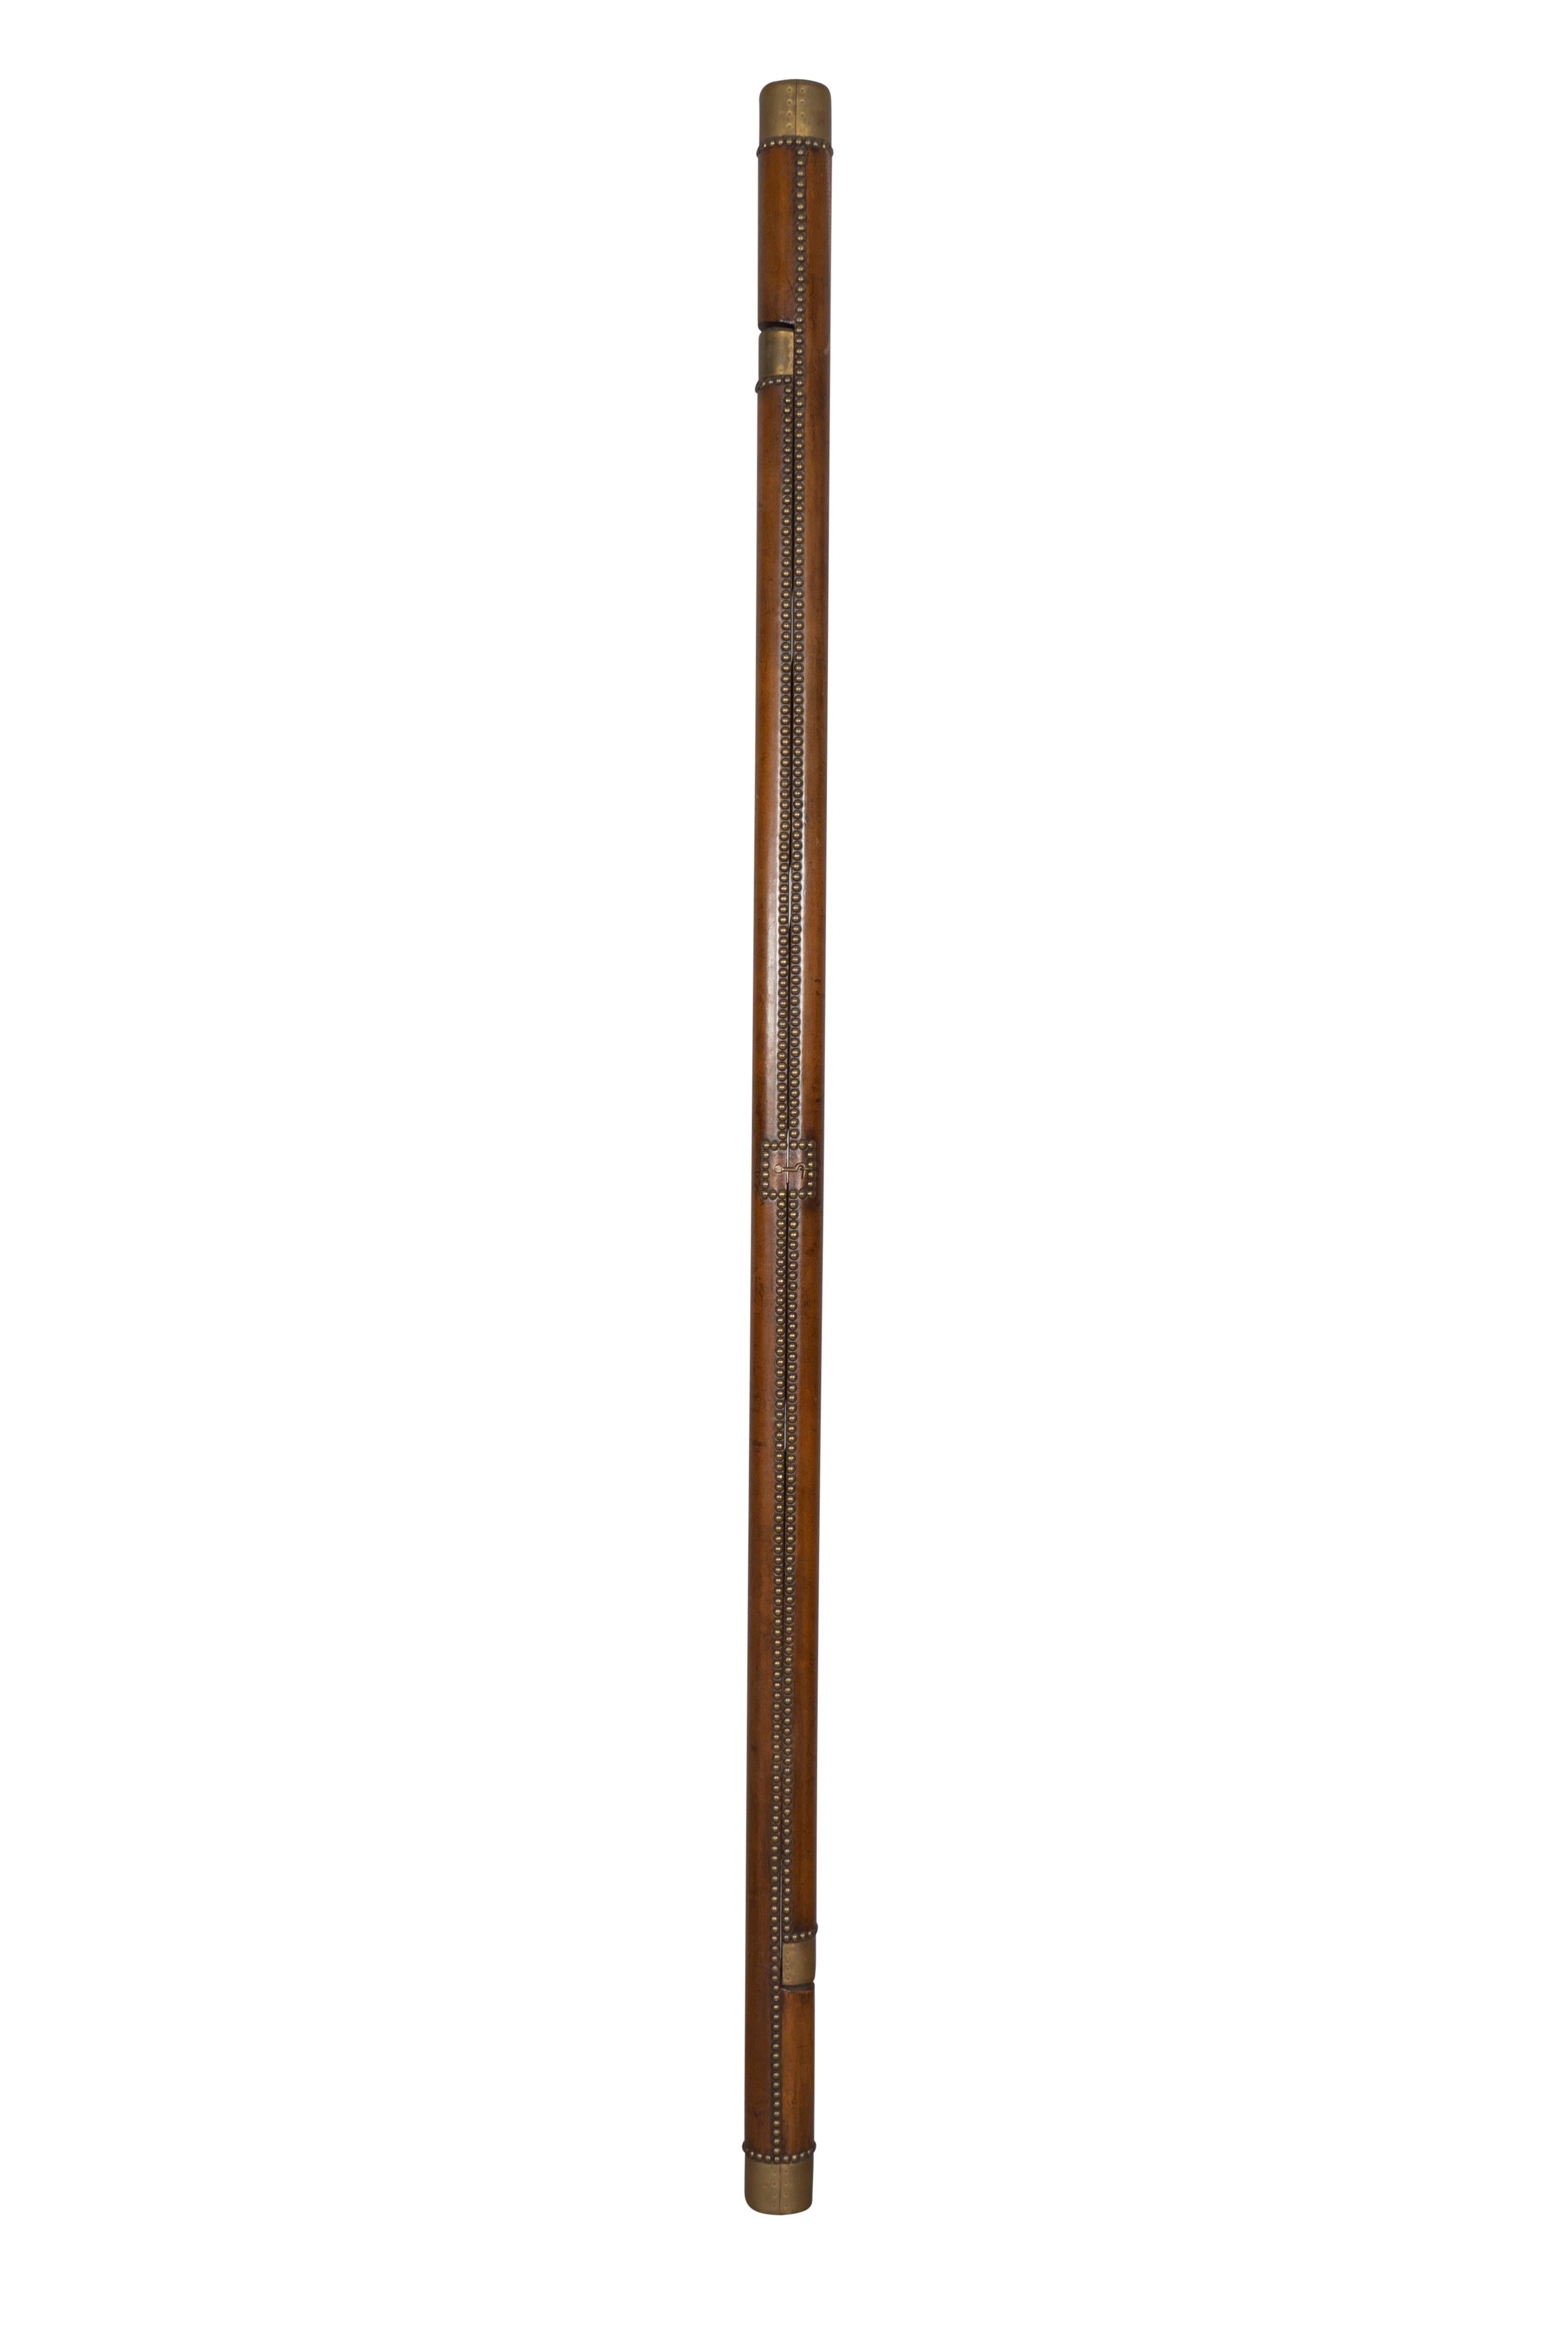 Folds into a stick. Wood core covered in brown leather with brass tacks. Hook latch to keep it closed. When closed its 91 inches high. Rungs are 9.25 inches wide.